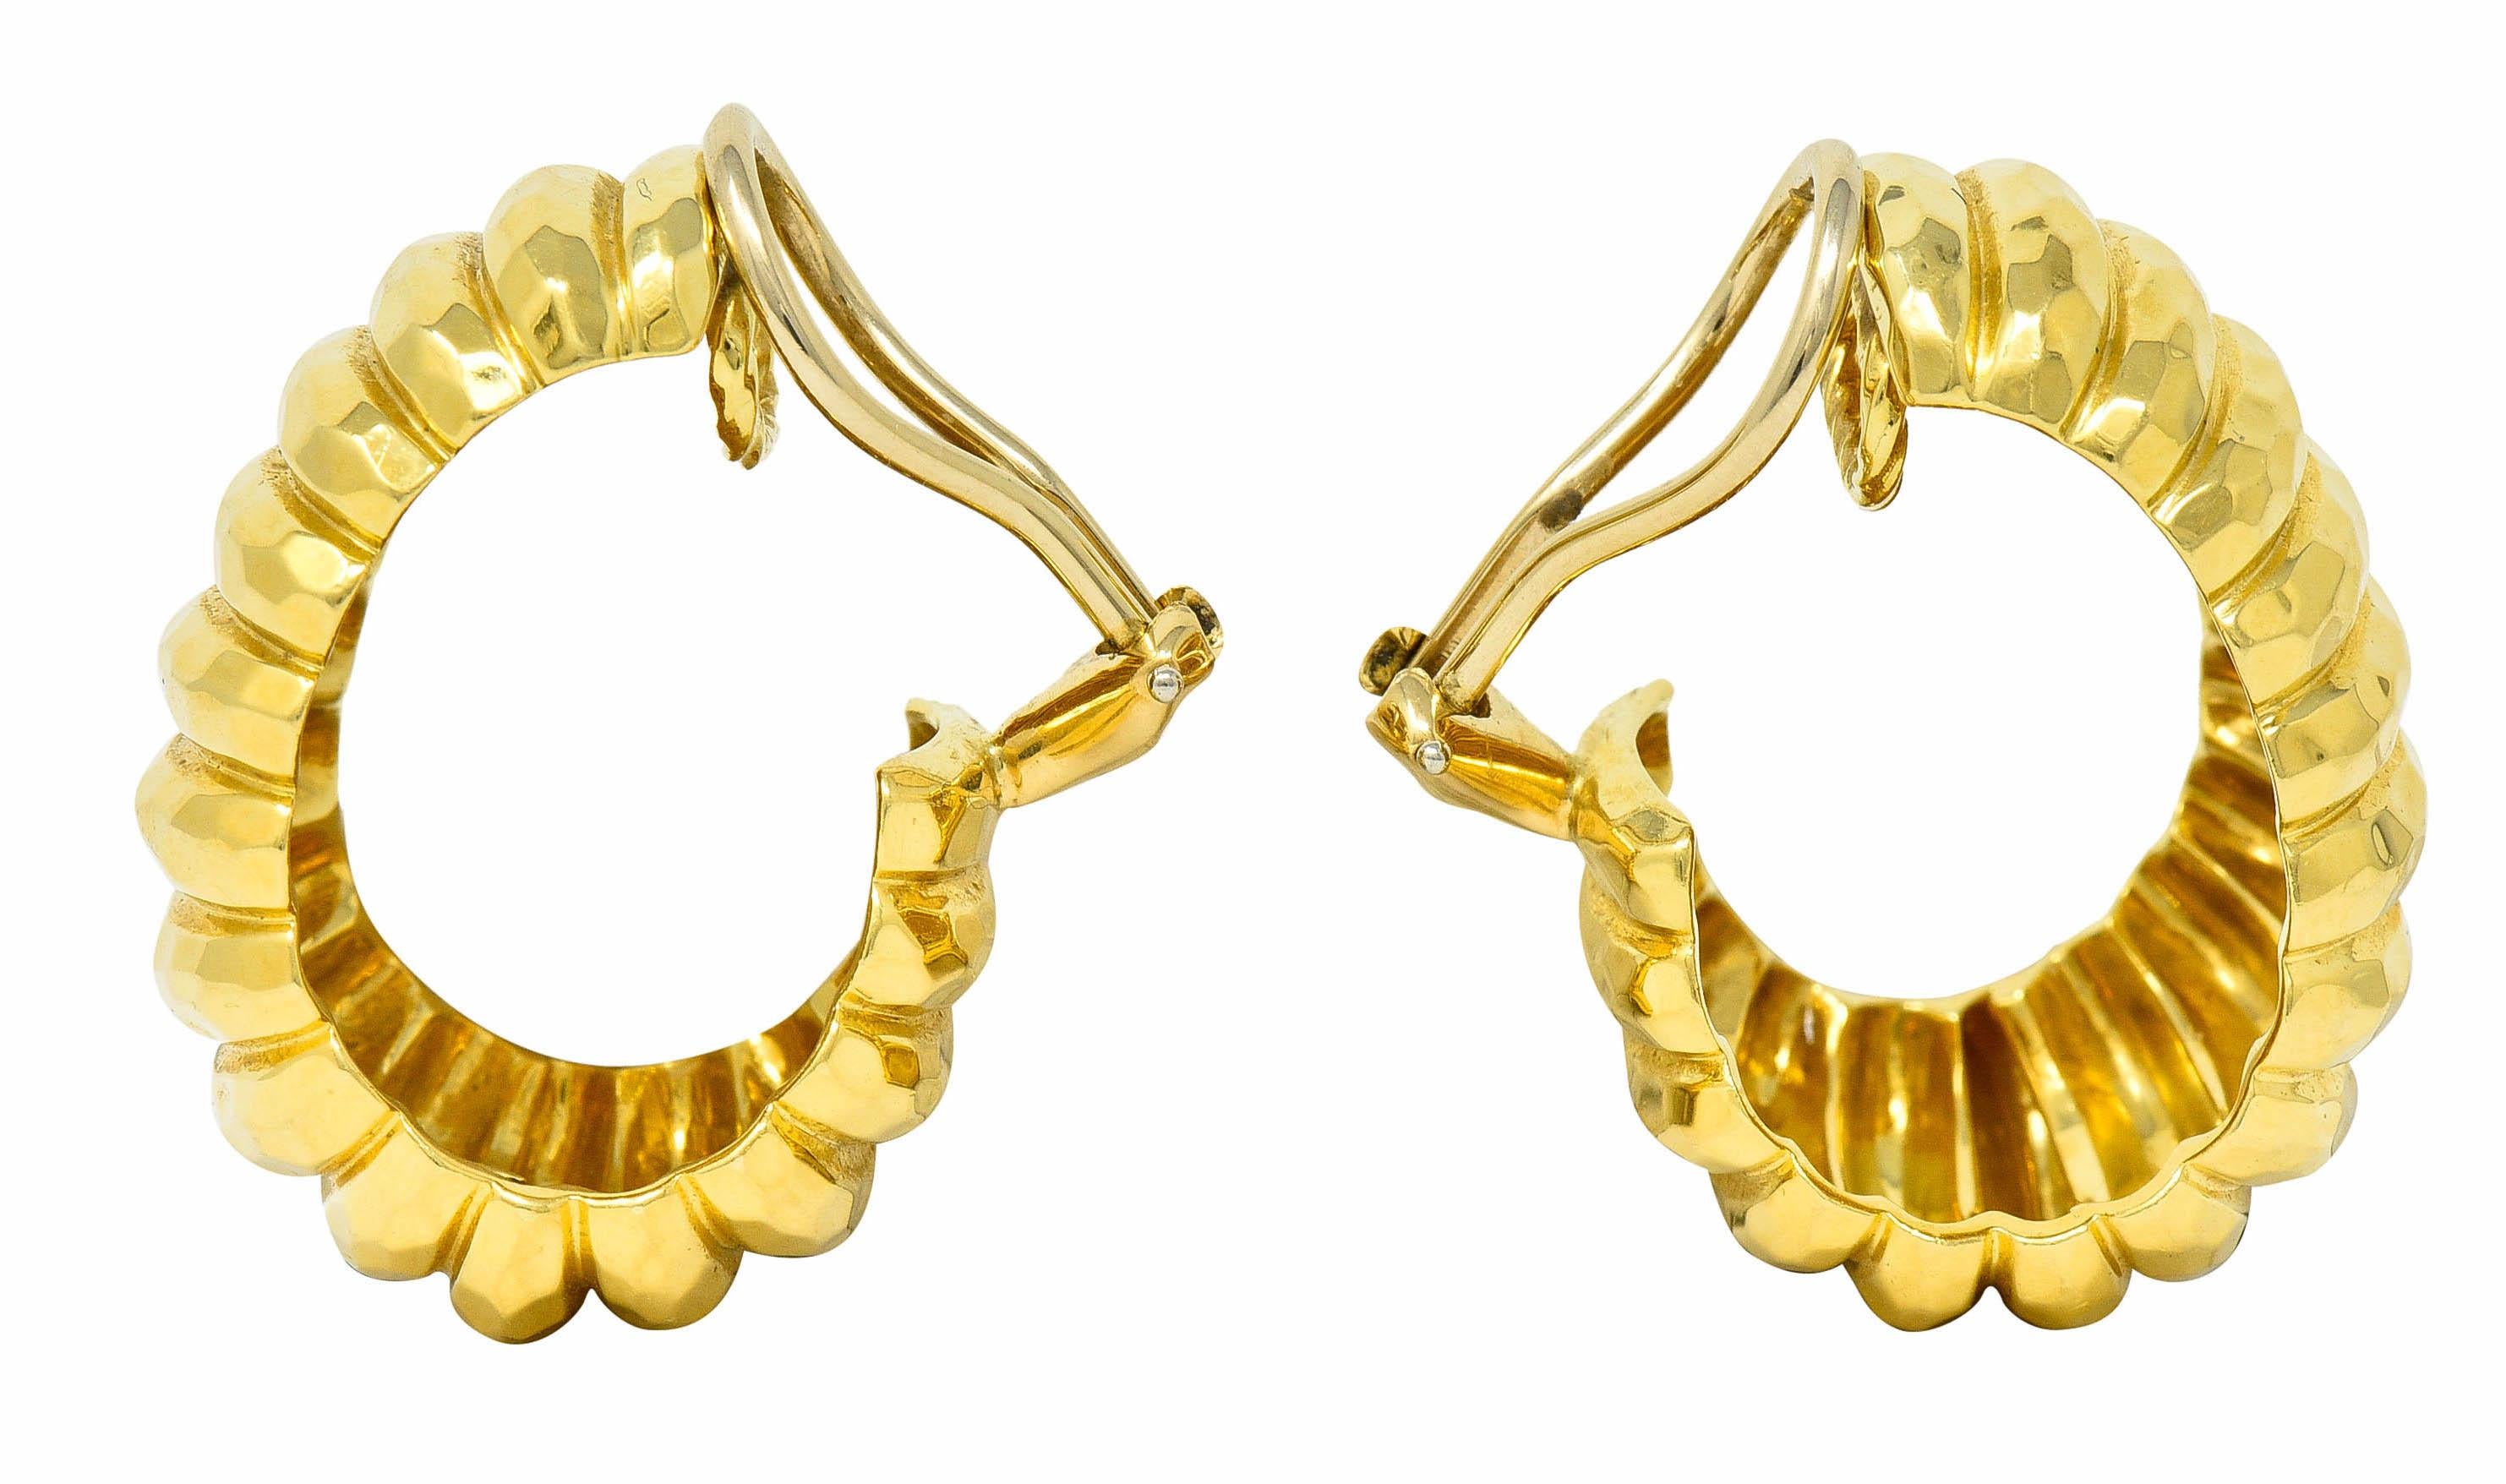 J hoop earrings are deeply ridged with a brightly polished and faceted finish

Completed by hinged omega back earrings

Stamped 18K and 750 for 18 karat gold

Numbered, signed Dunay, and with maker's mark for Henry Dunay

From the vintage Cynnabar